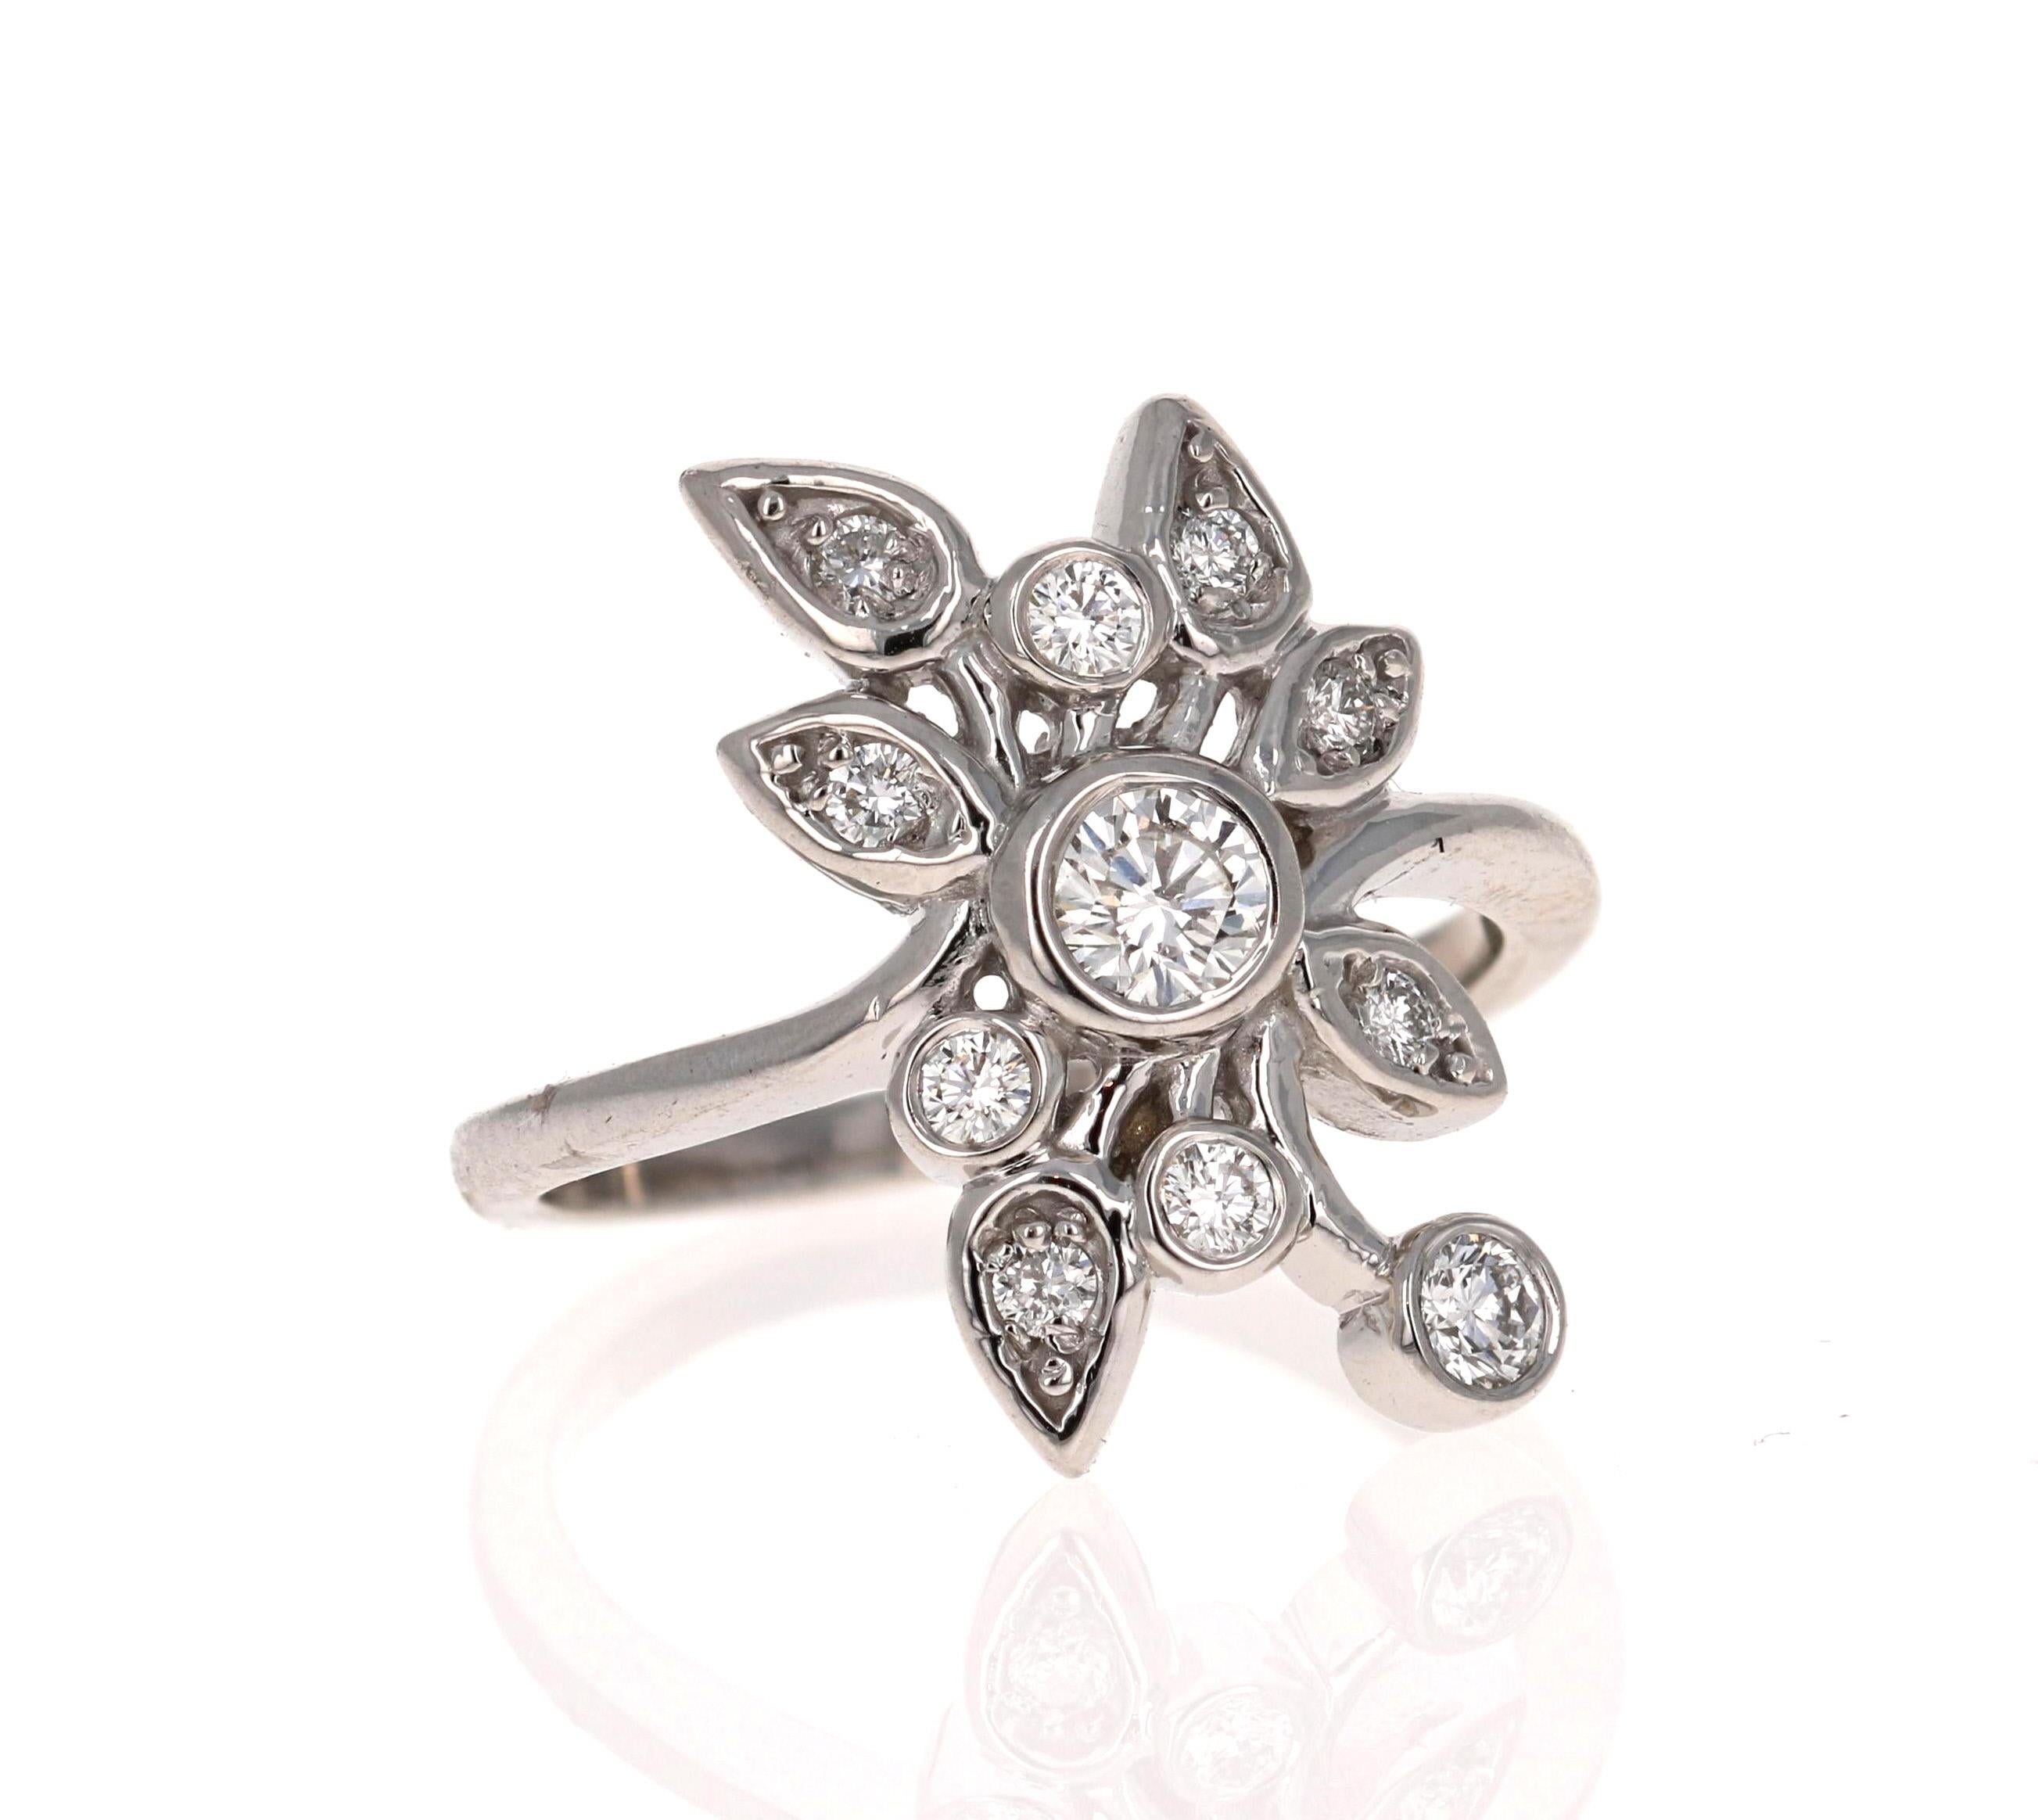 Charming Cocktail Ring with a flower motif design!
It sits well on the middle or ring fingers! Can be worn as a statement ring which screams out #bossbabe #bosslady #girlpower for the independent and strong ladies out there or can be given as a cute